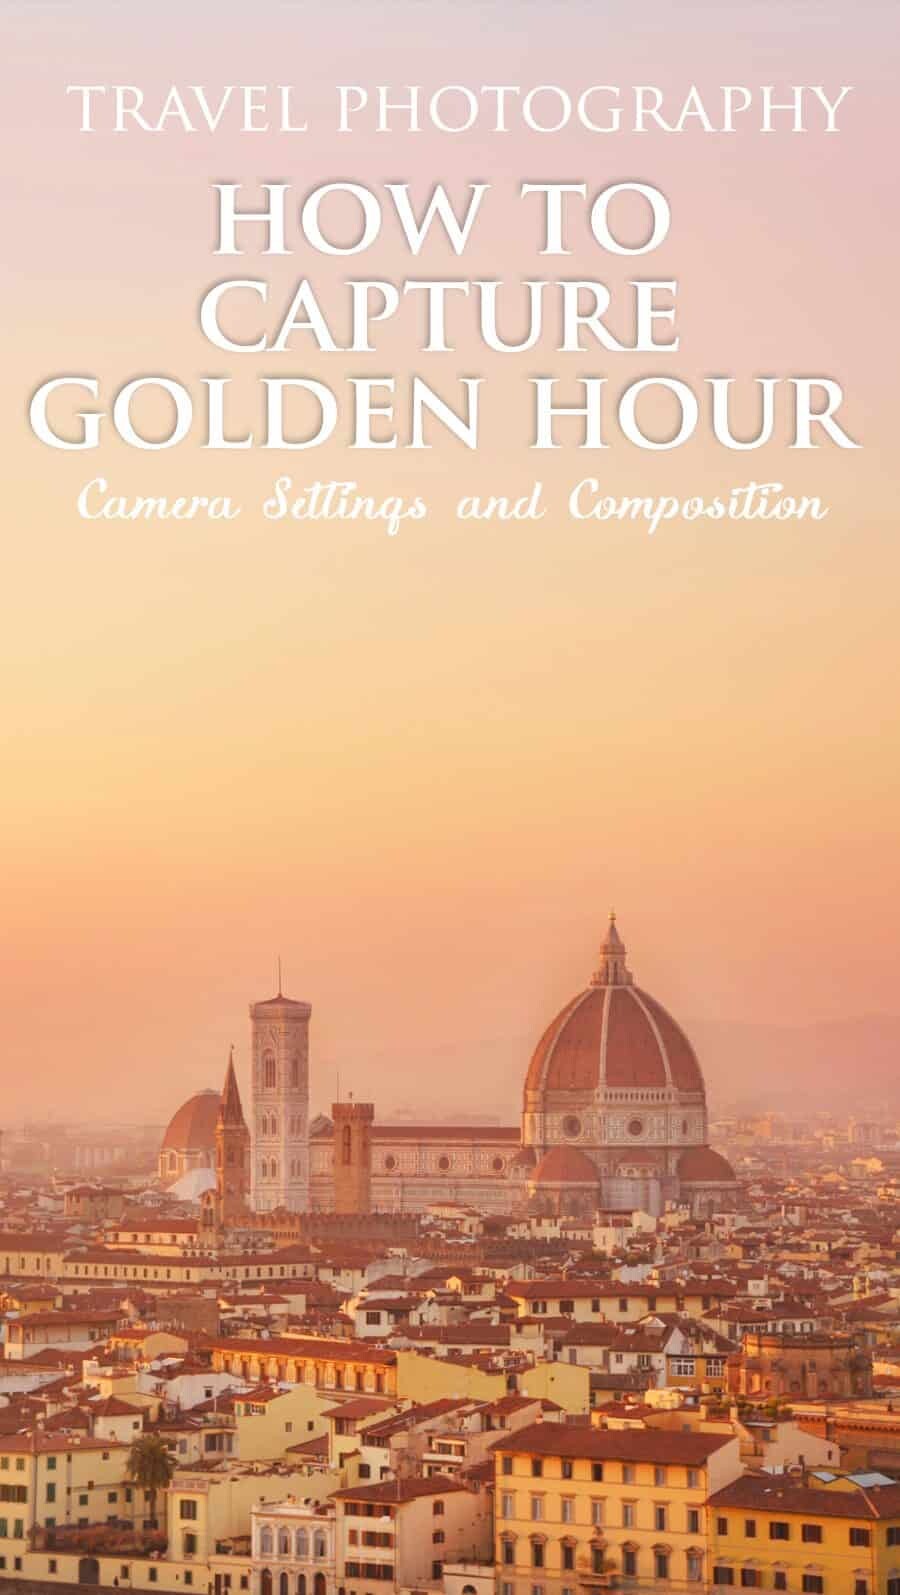 Travel Photography - Golden Hour the best camera settings and composition advice.